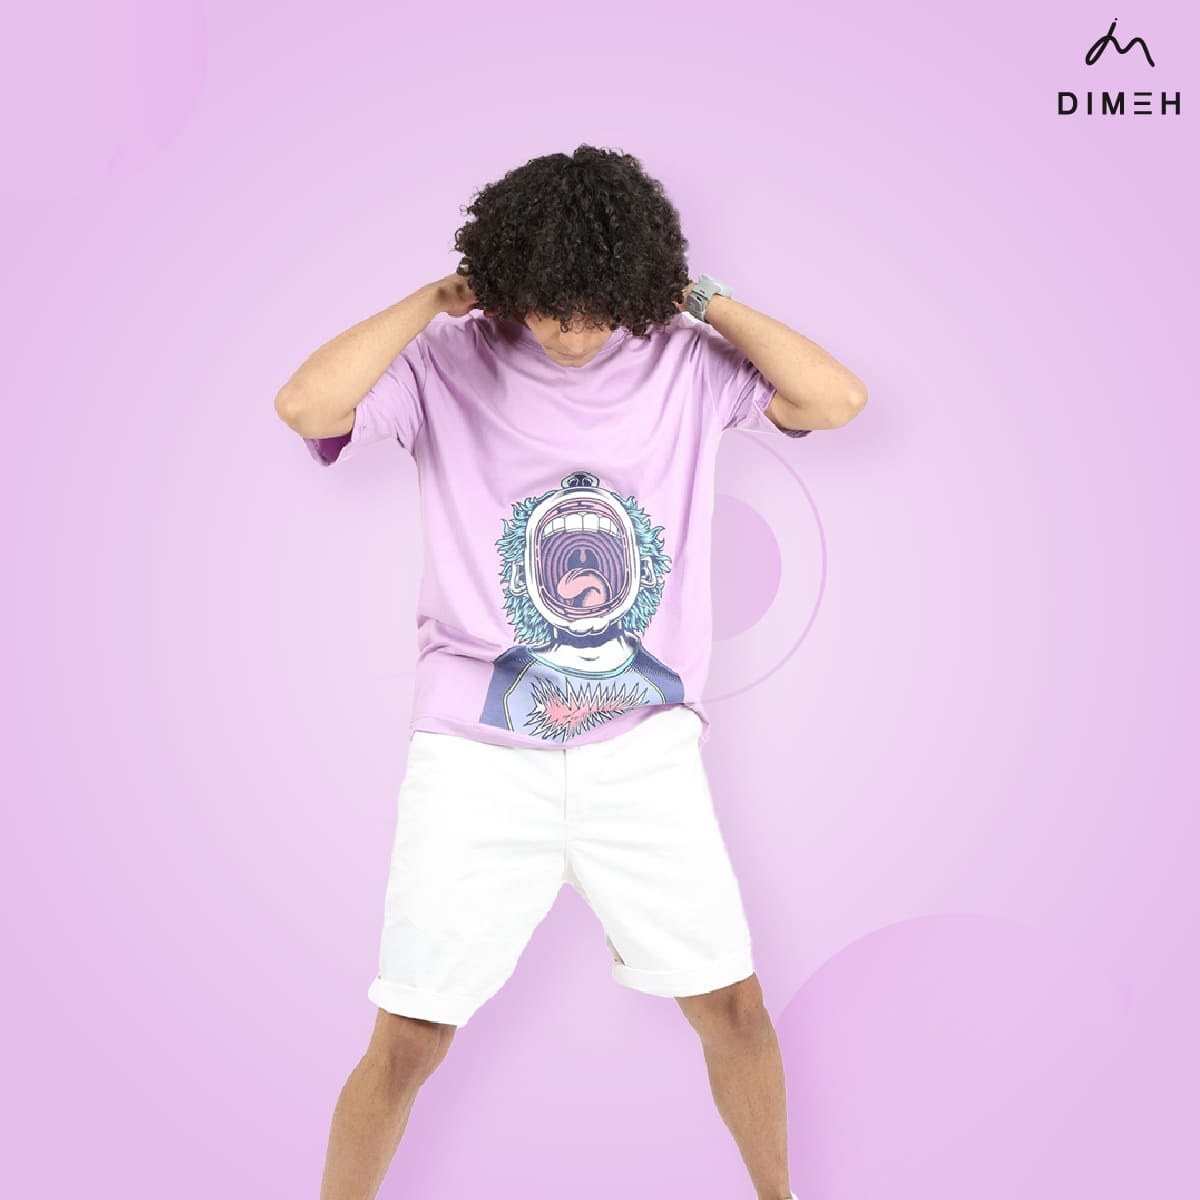 Spreading Good Vibes, One Stitch at a Time!

Available on dimeh.co.in
.
.
.
.
#Dimeh #DimehClothing #printedtees #trendingclothes #coordsets #ilovestreetstyle #streetstyleinspo 
#printedteeshirt #tshirtonline #instafashionblogger #viral